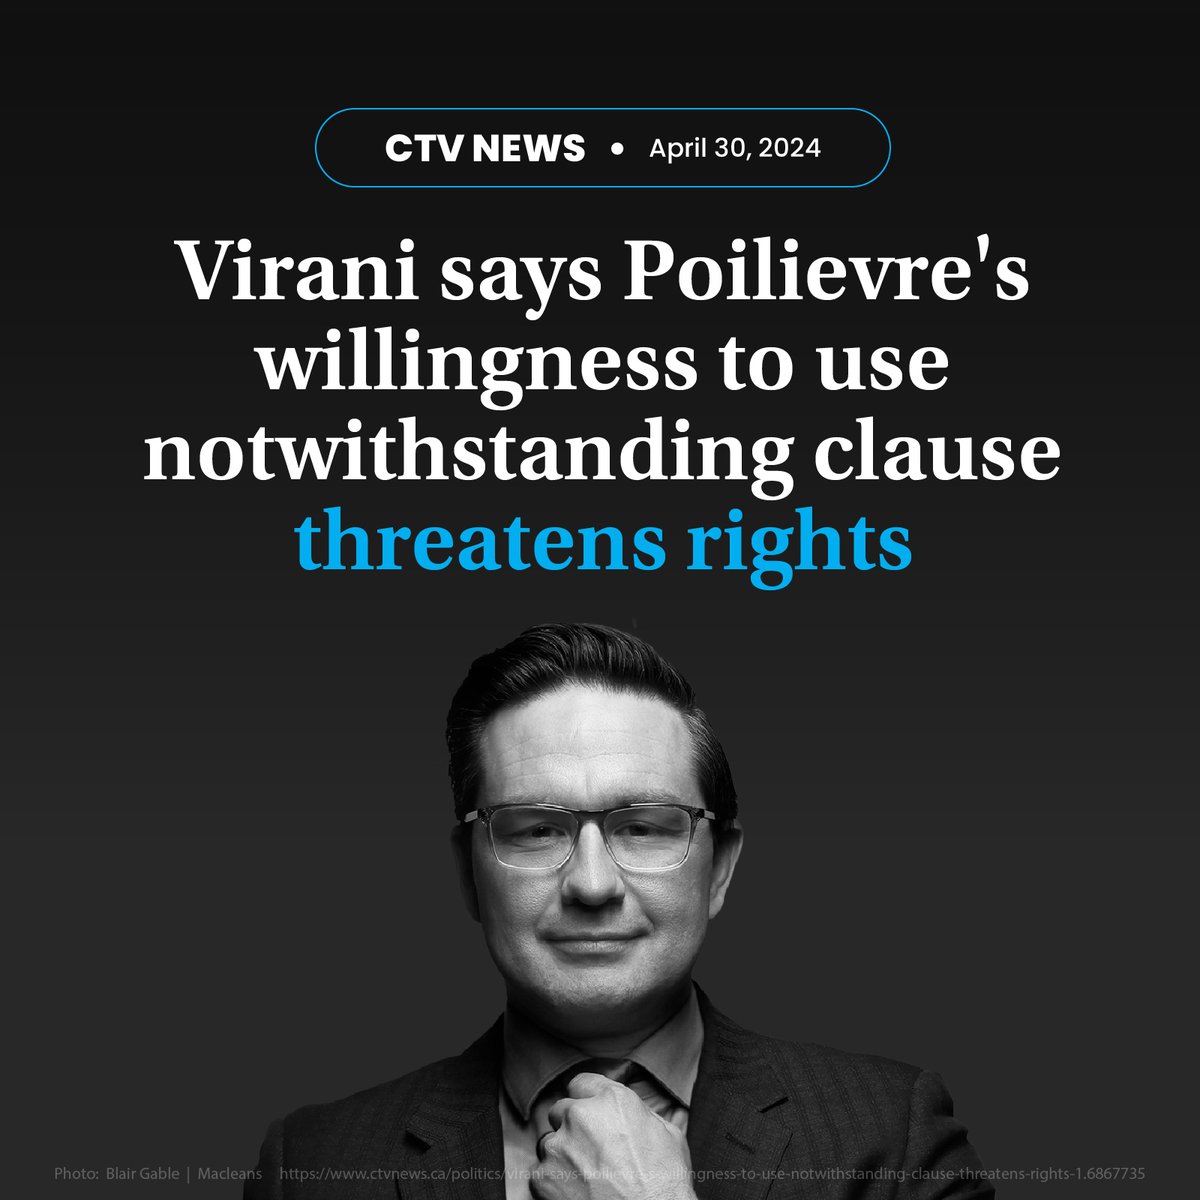 Pierre Poilievre is willing to hit the override button on your rights and freedoms. How far would he go?